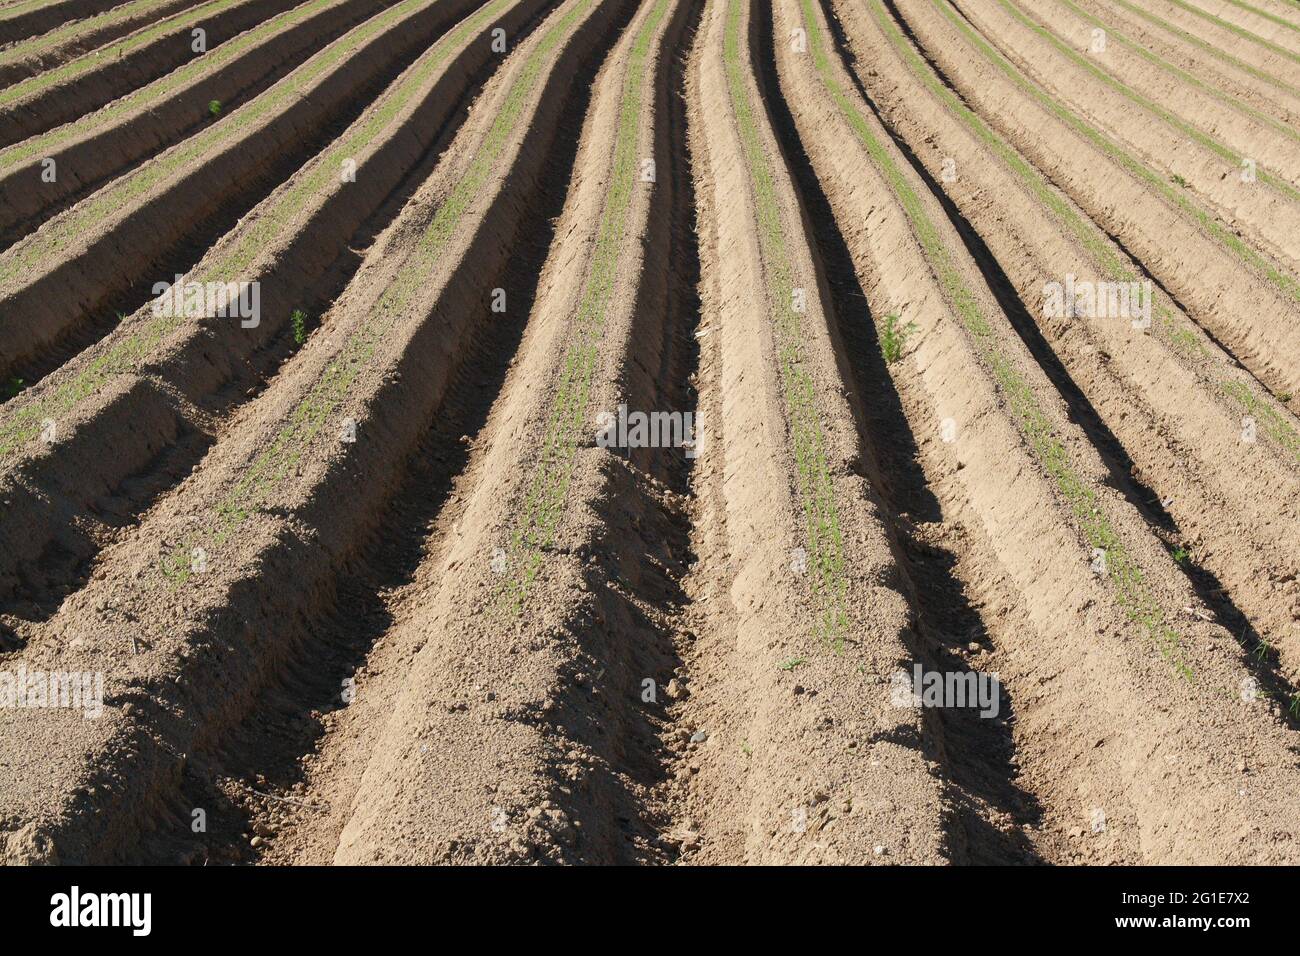 Newly-planted potato field, showing the ridges and furrows in the morning sunshine Stock Photo